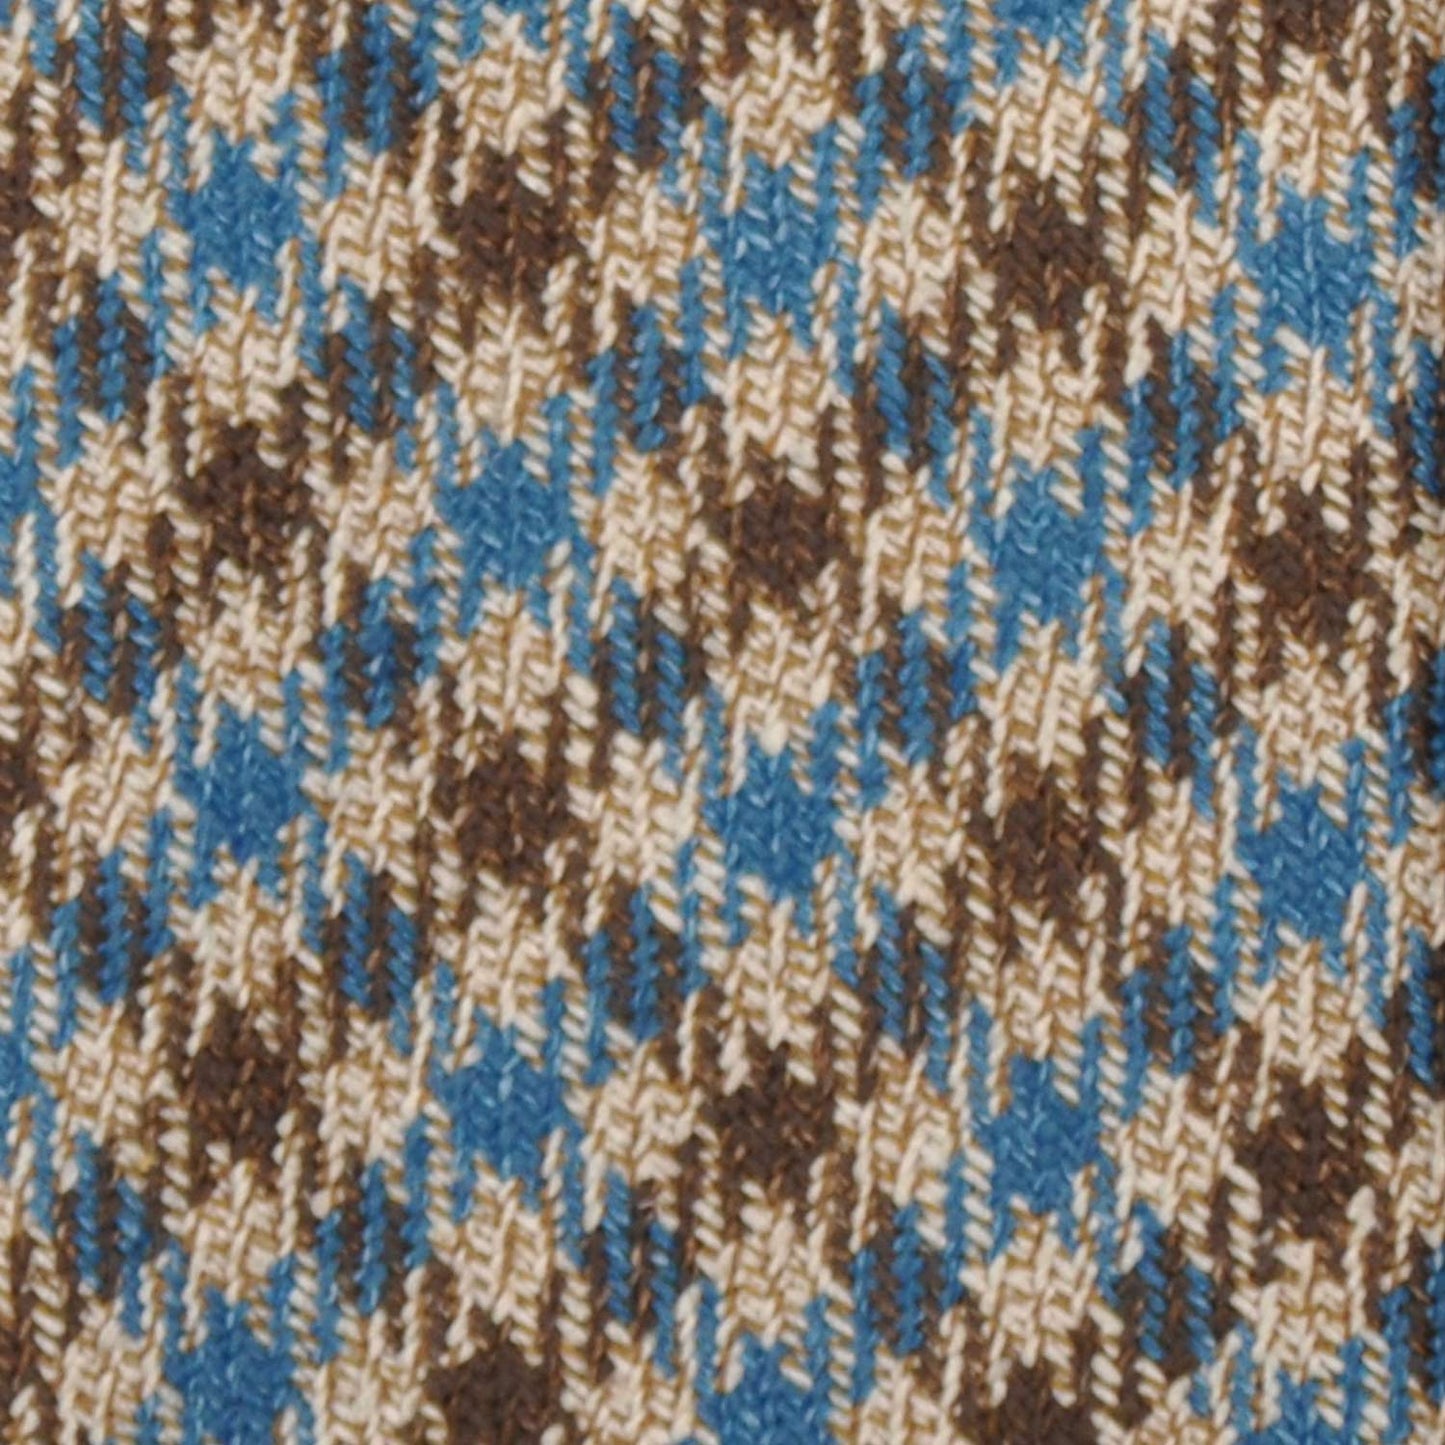 Load image into Gallery viewer, F.Marino Checks Flannel Wool Tie 3 Folds Cyan-Wools Boutique Uomo
